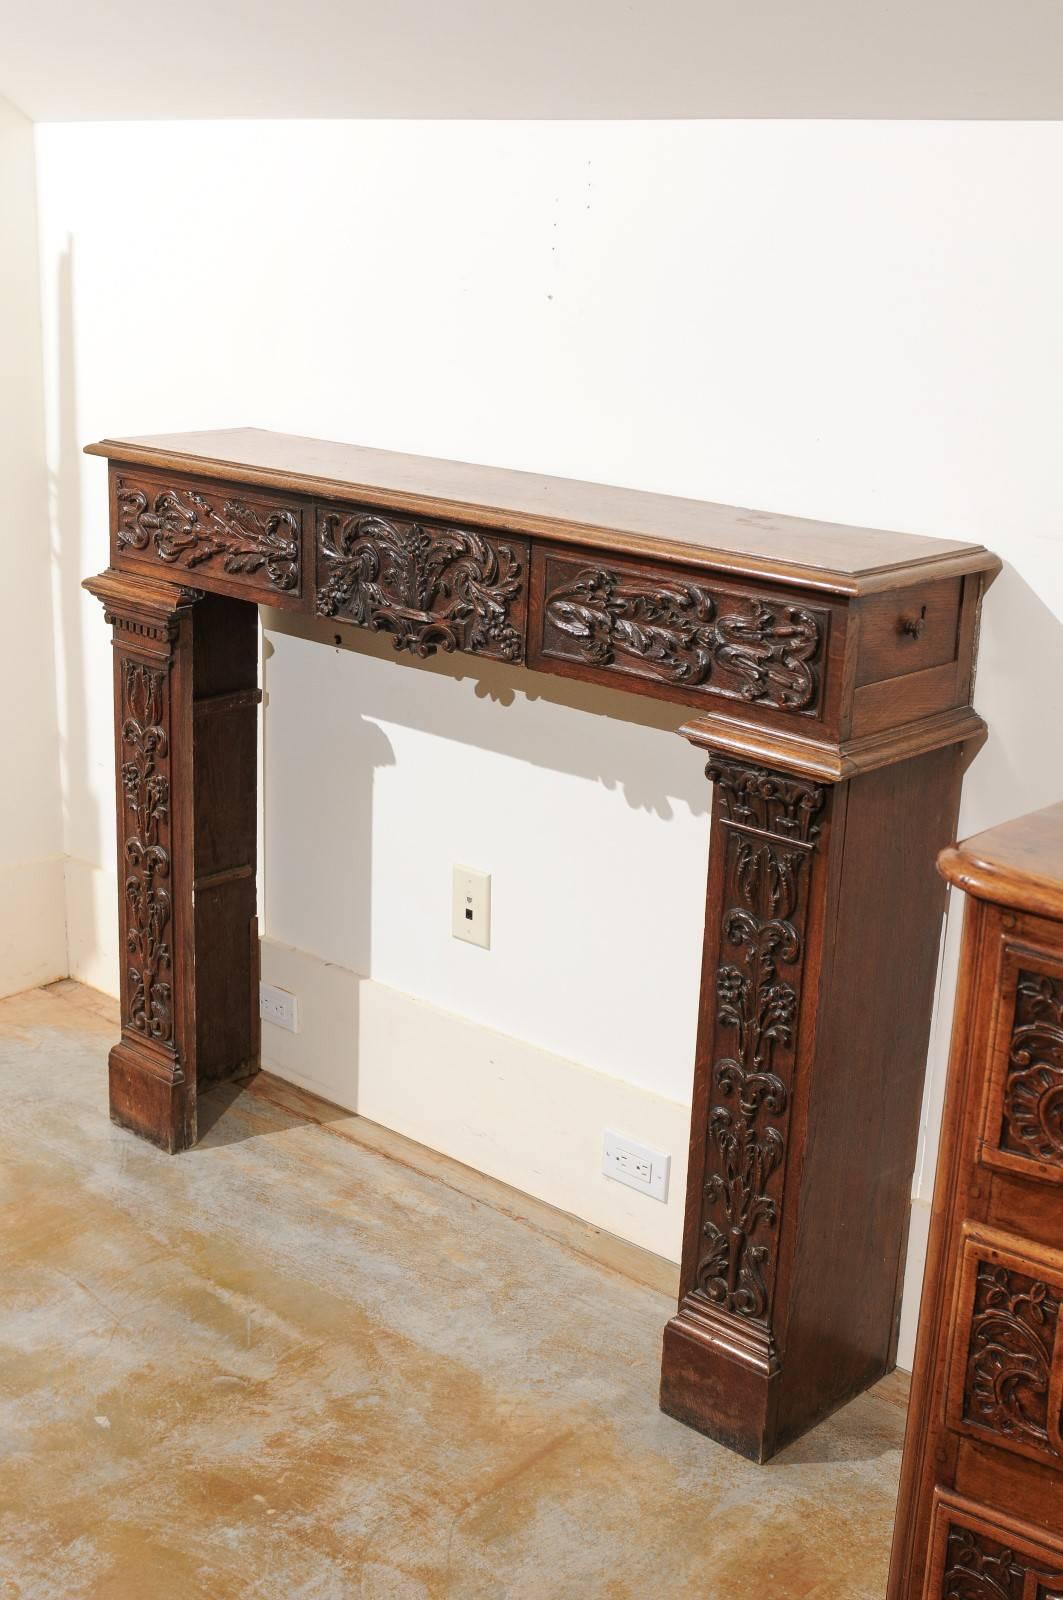 A French Renaissance Revival carved wood fireplace mantel with drawers from the late 19th century. This French fireplace mantel features a richly carved surround, showing us the renewed taste for classical styles of the 1880s. A central drawer is